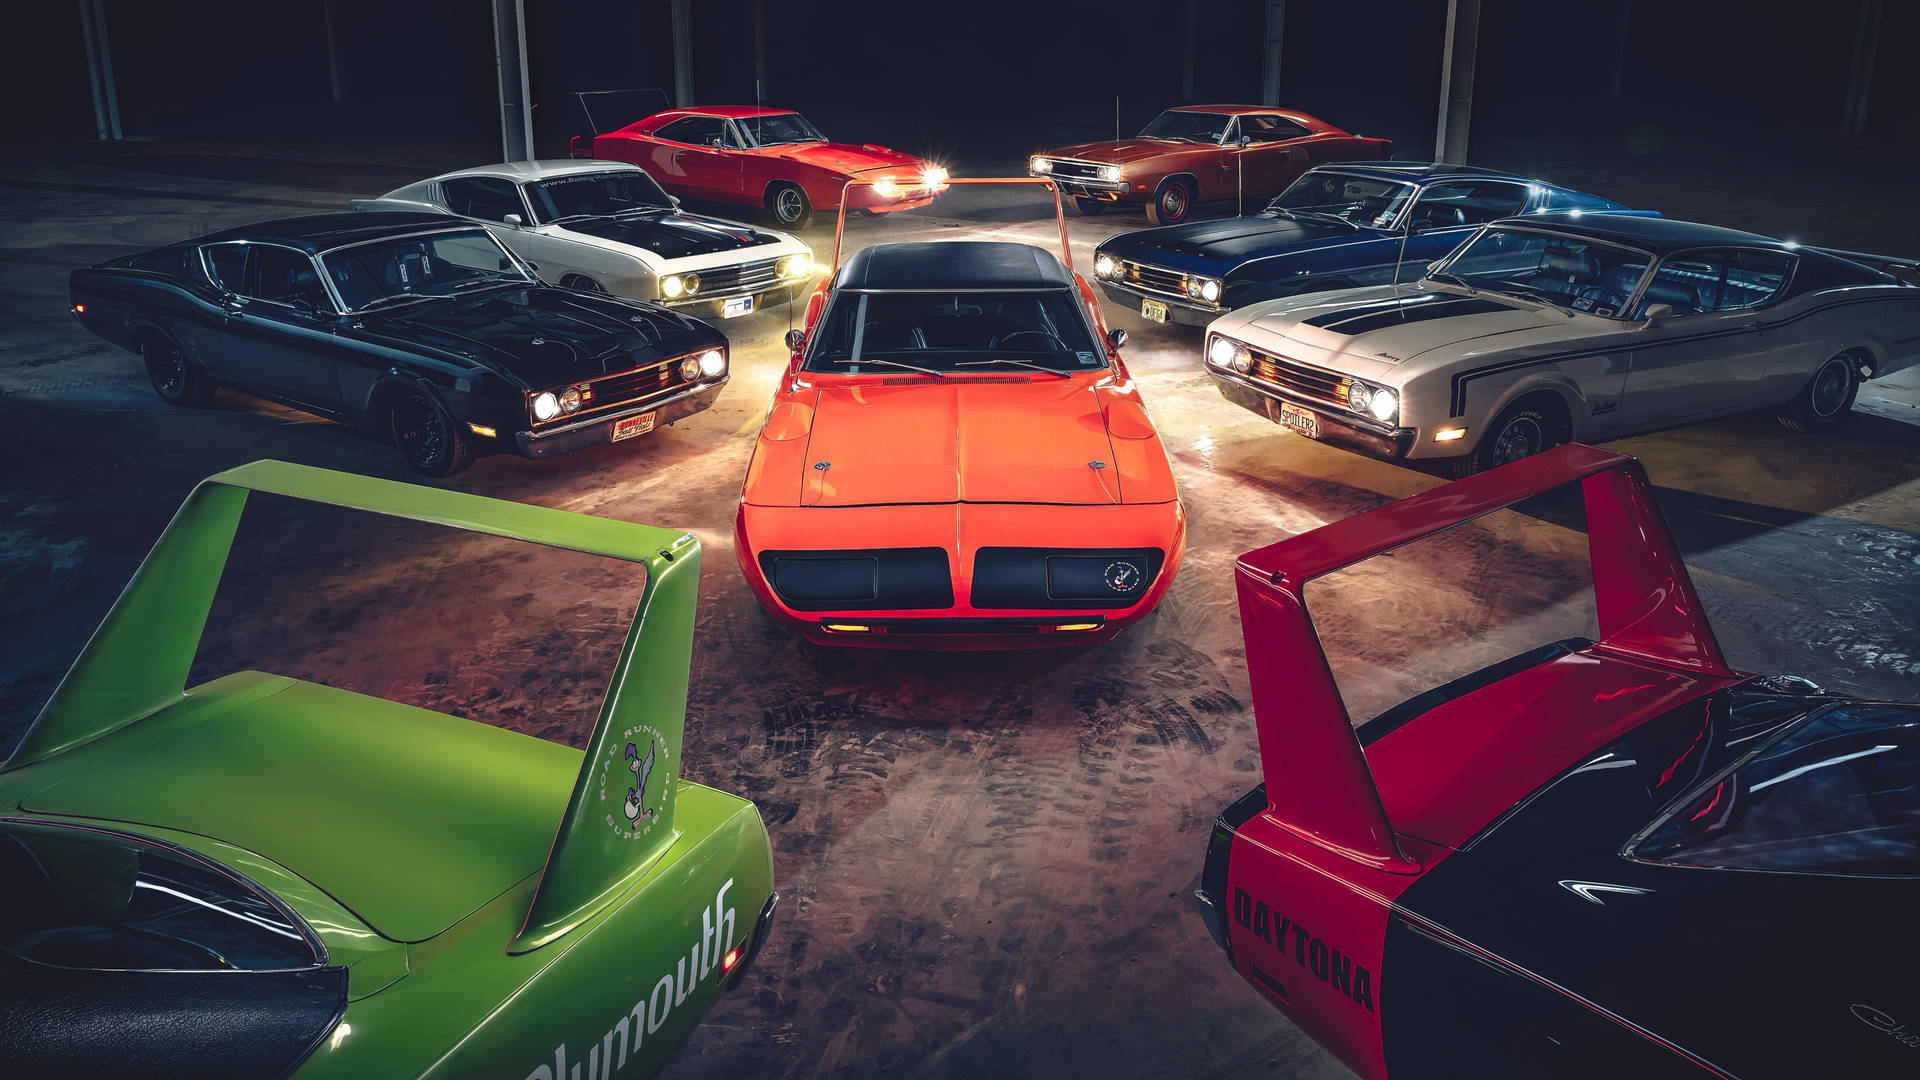 Plymouth Muscle Aesthetic 4k Car Wallpaper